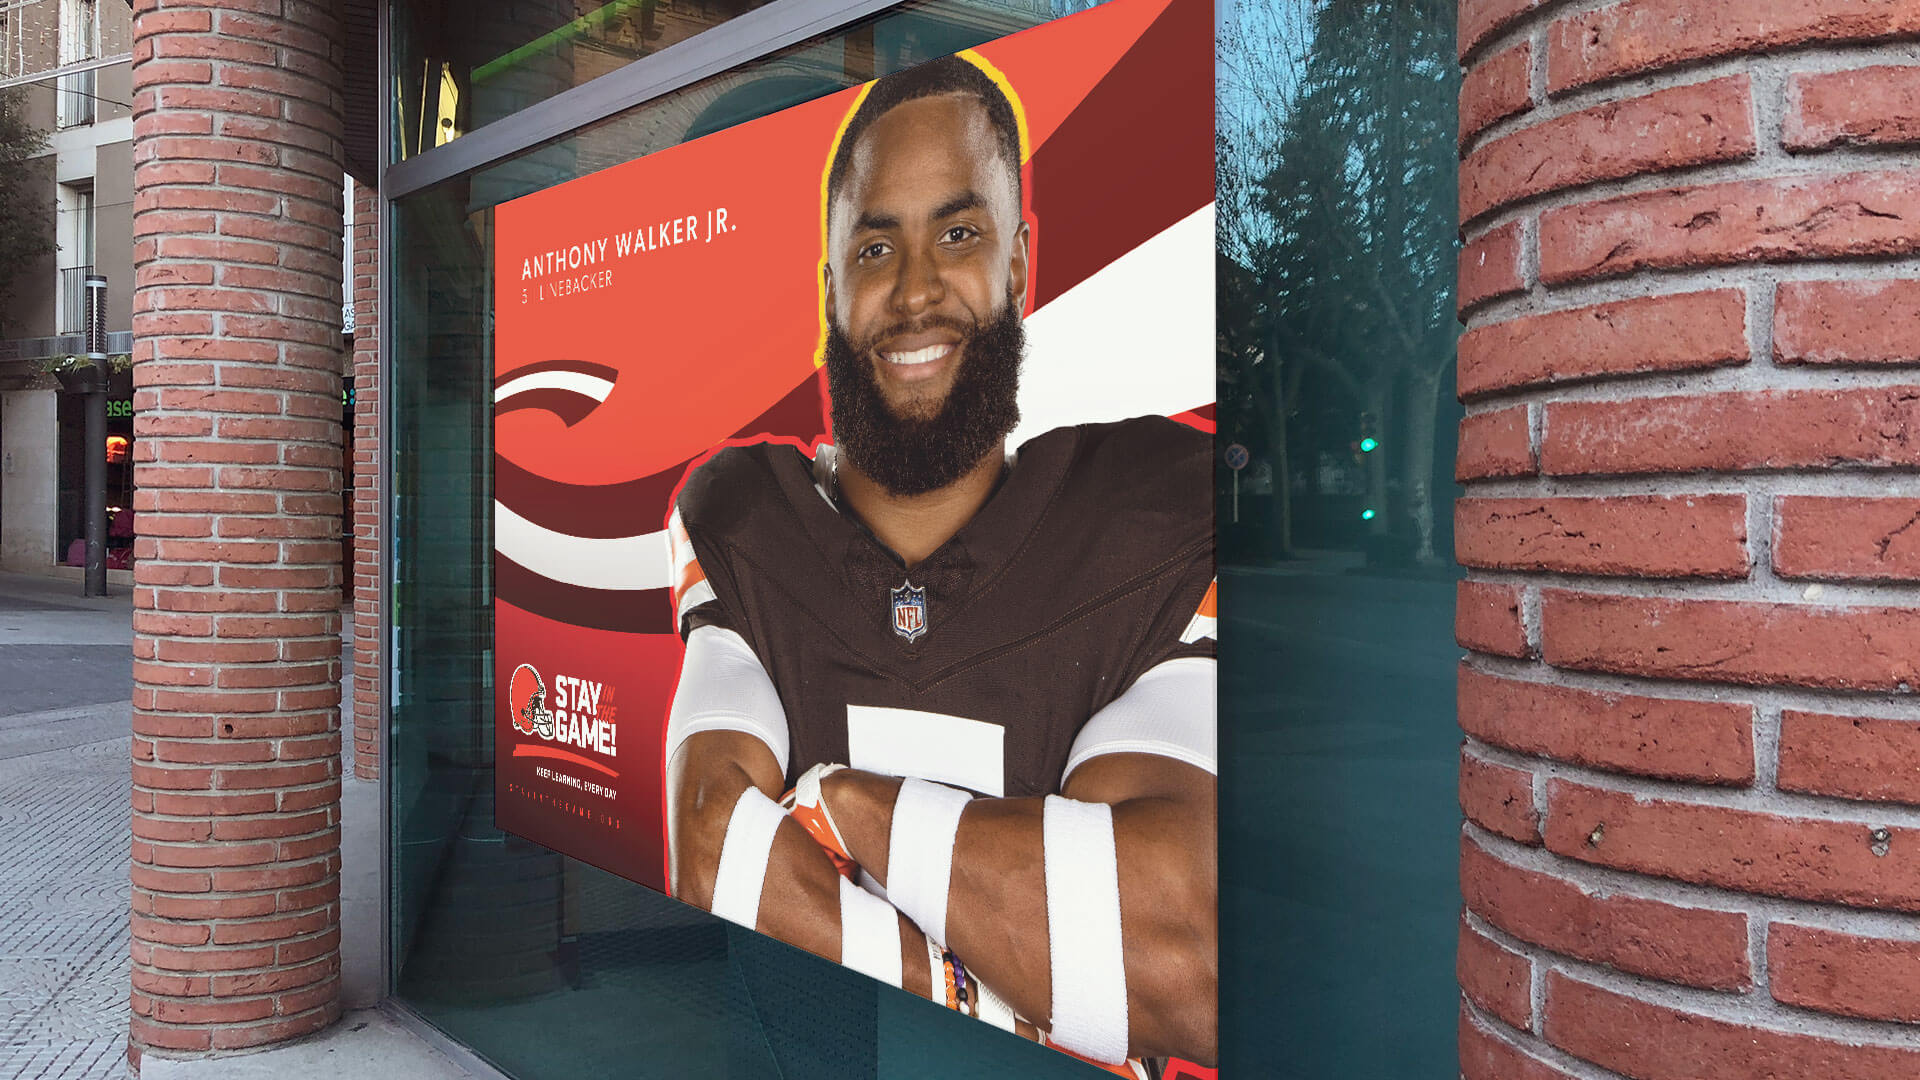 Cleveland Browns player Anthony Walker Jr. on a Stay in the Game poster